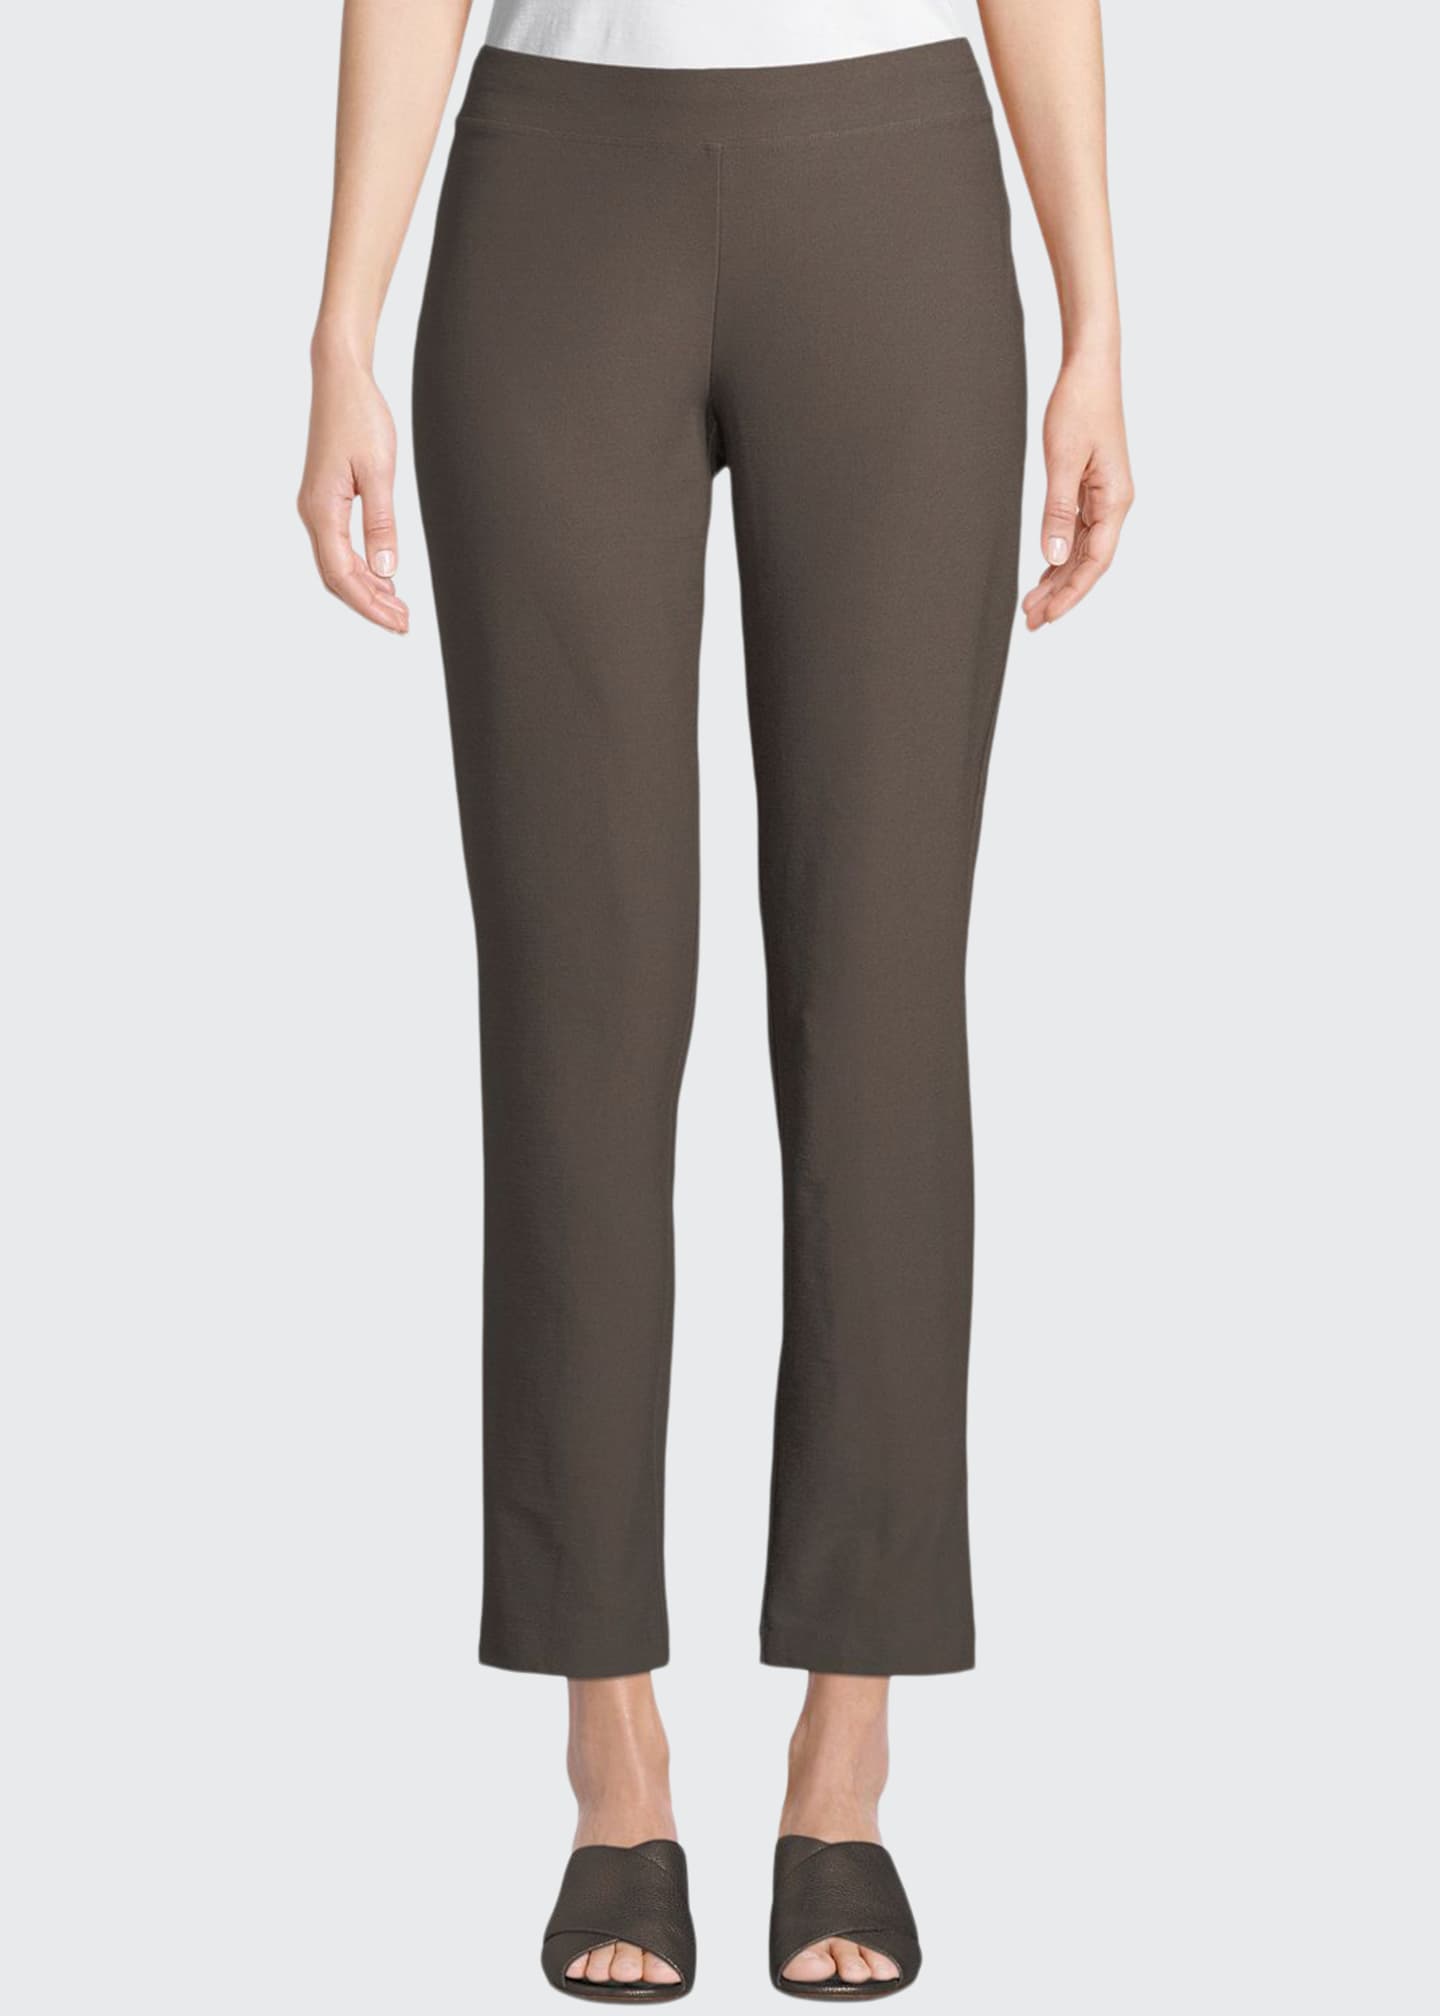 Eileen Fisher Washable Stretch Crepe Slim Ankle Pant - Midnight